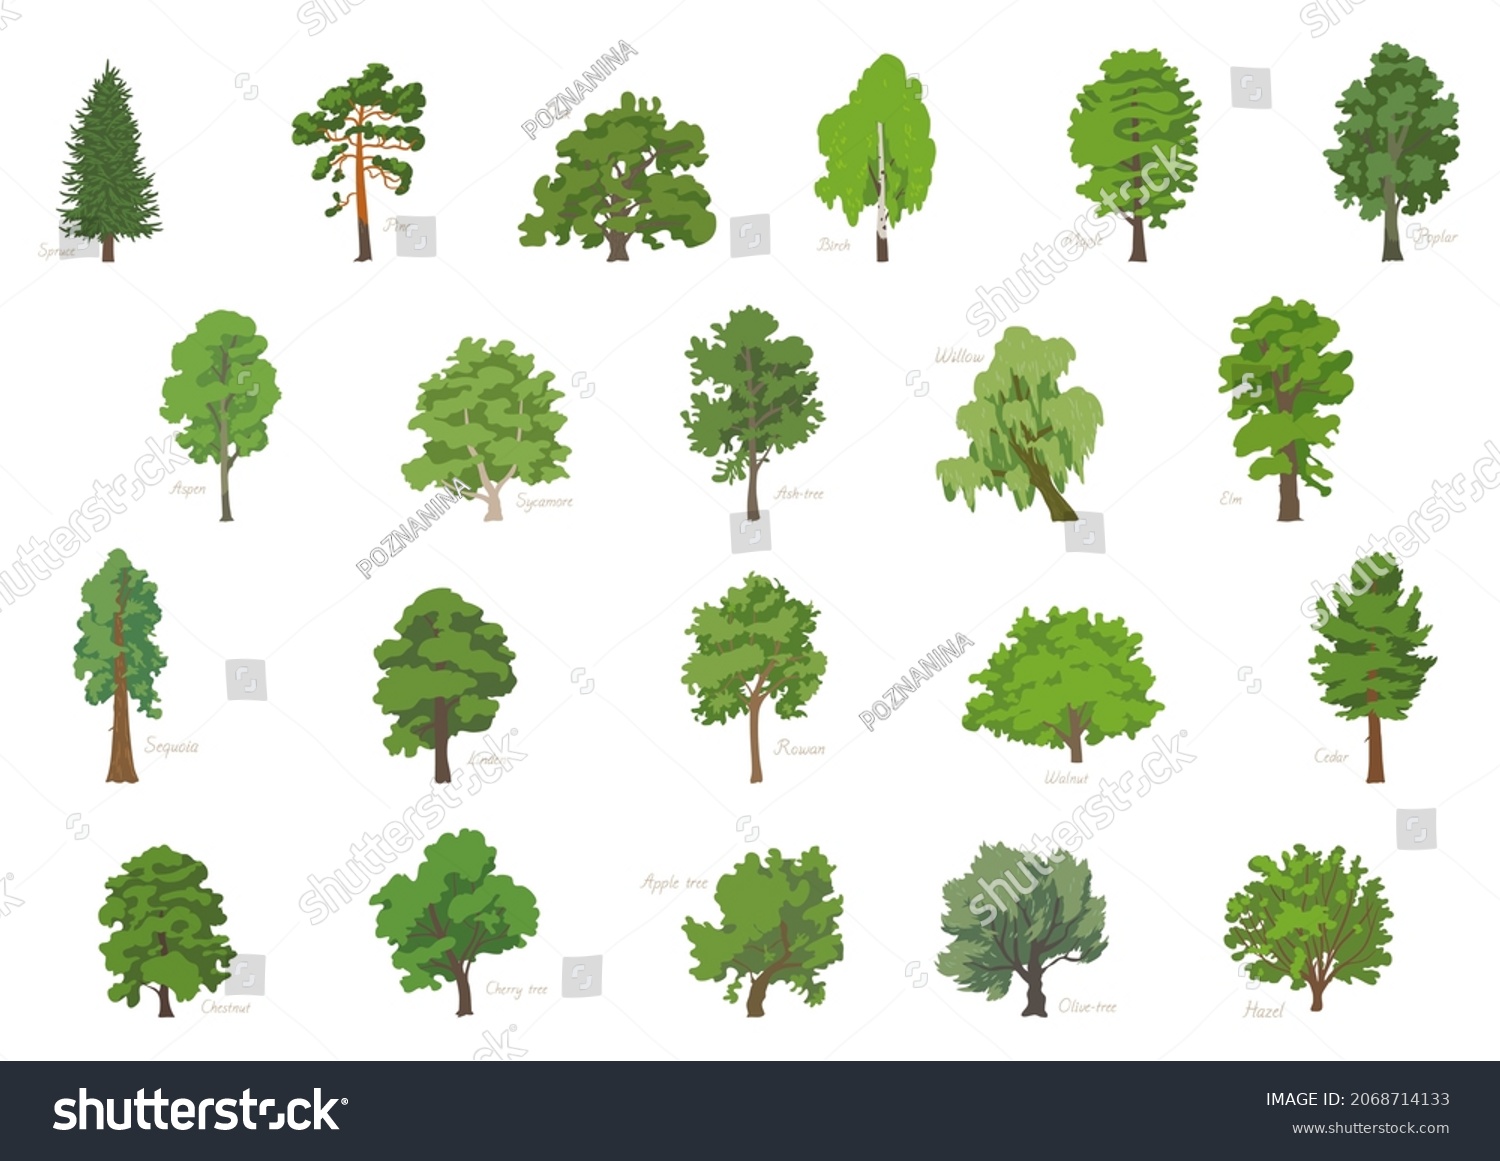 SVG of Vector illustration set of different kinds of trees with its names. svg